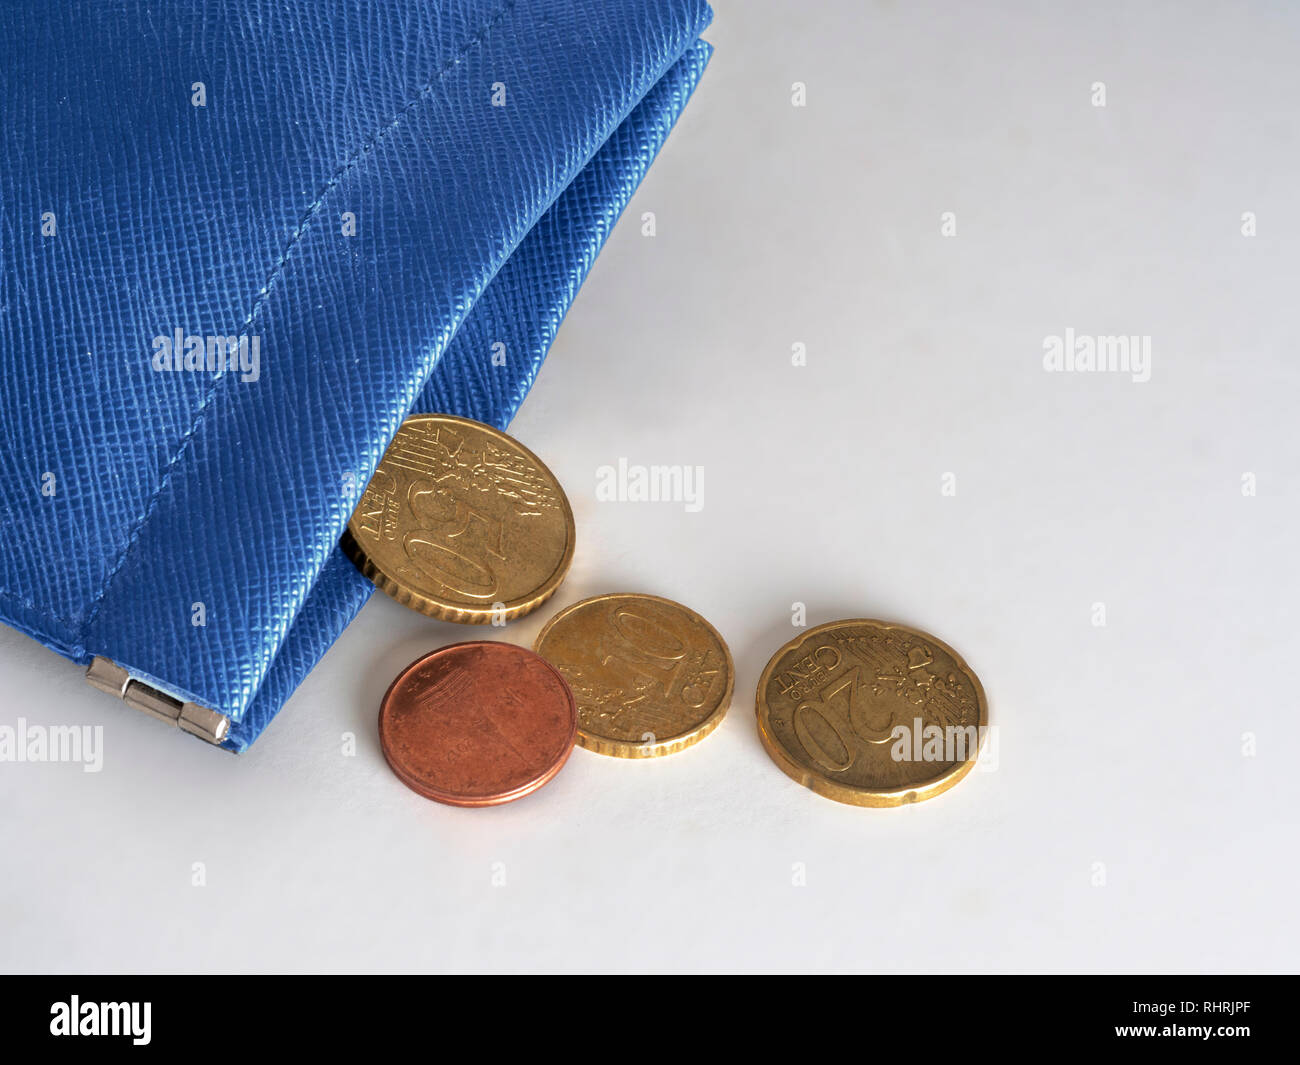 Blue purse almost empty, running out of money, euros. Financial, banking crisis, EU, Europe, Italy etc or poverty in the Union. Concept, metaphor. Stock Photo